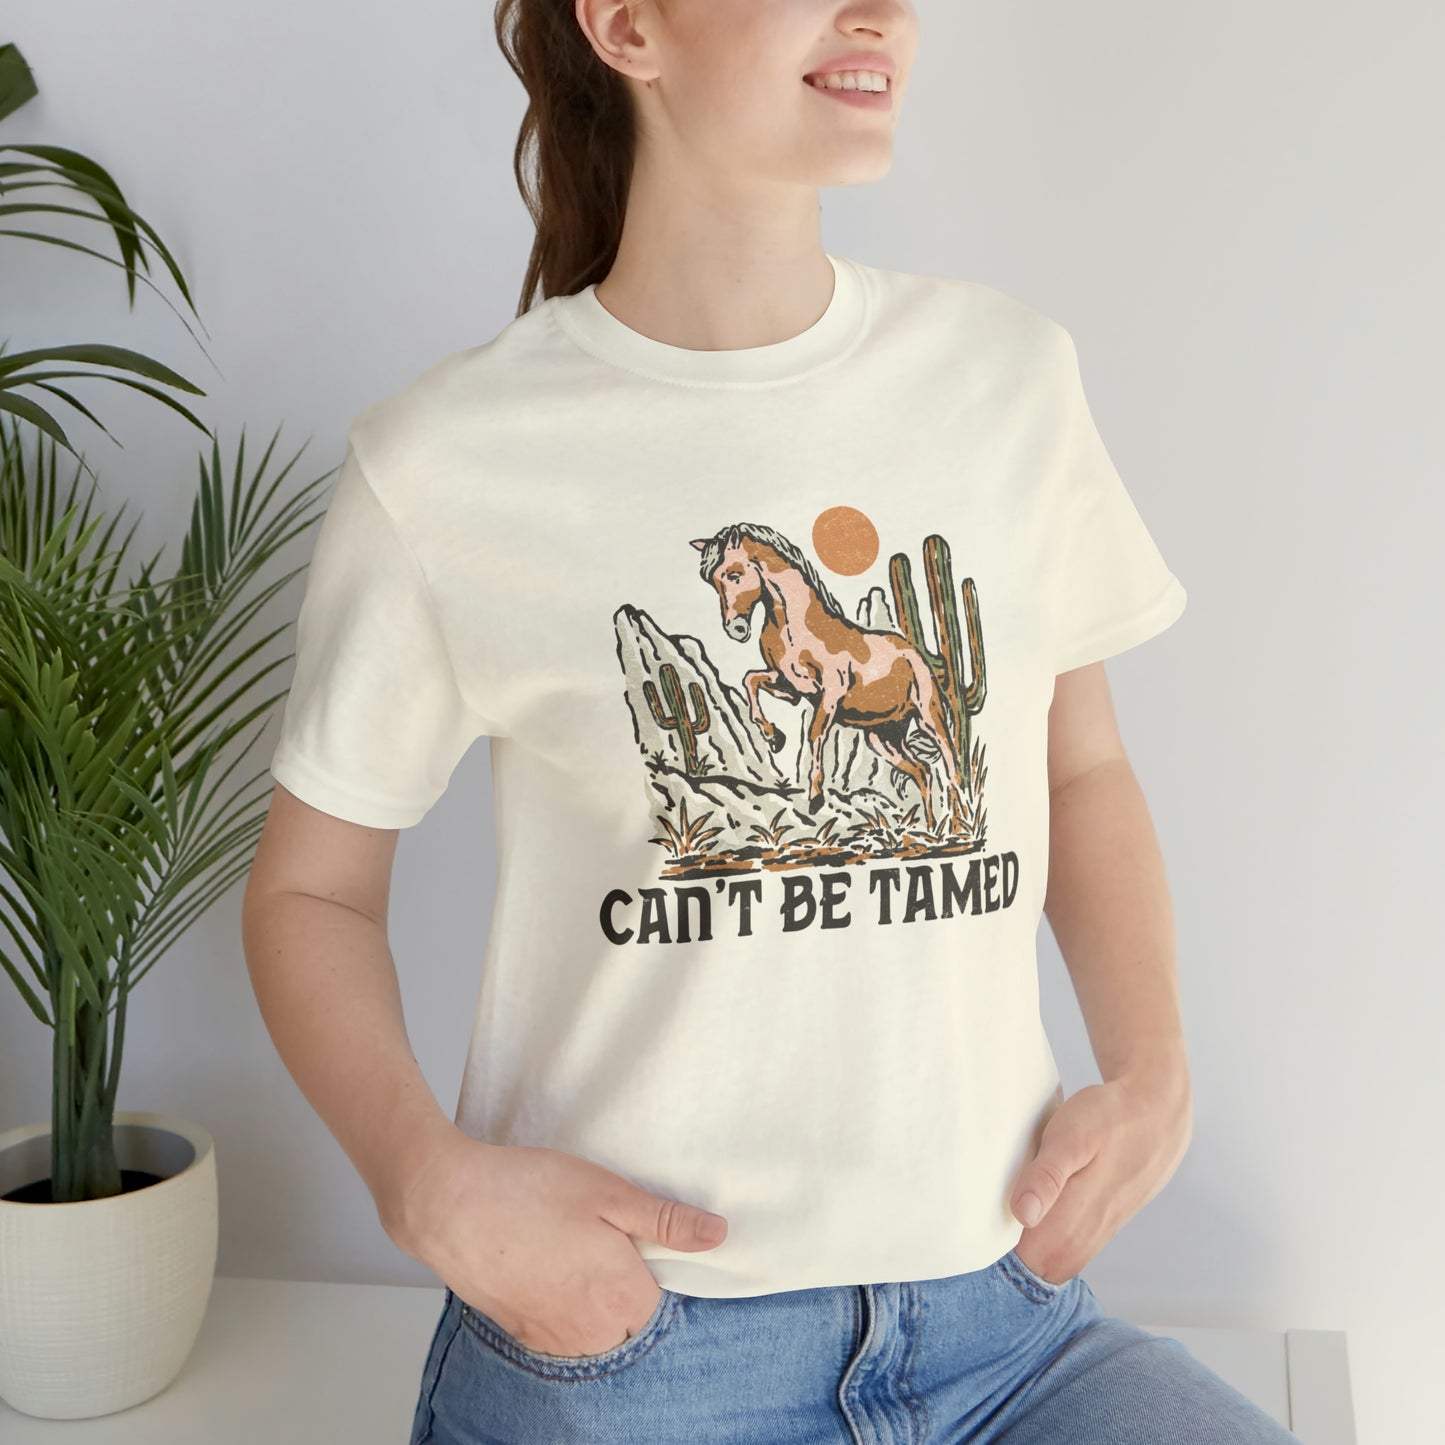 "Can't Be Tamed" Bella Canvas Short Sleeve Tee